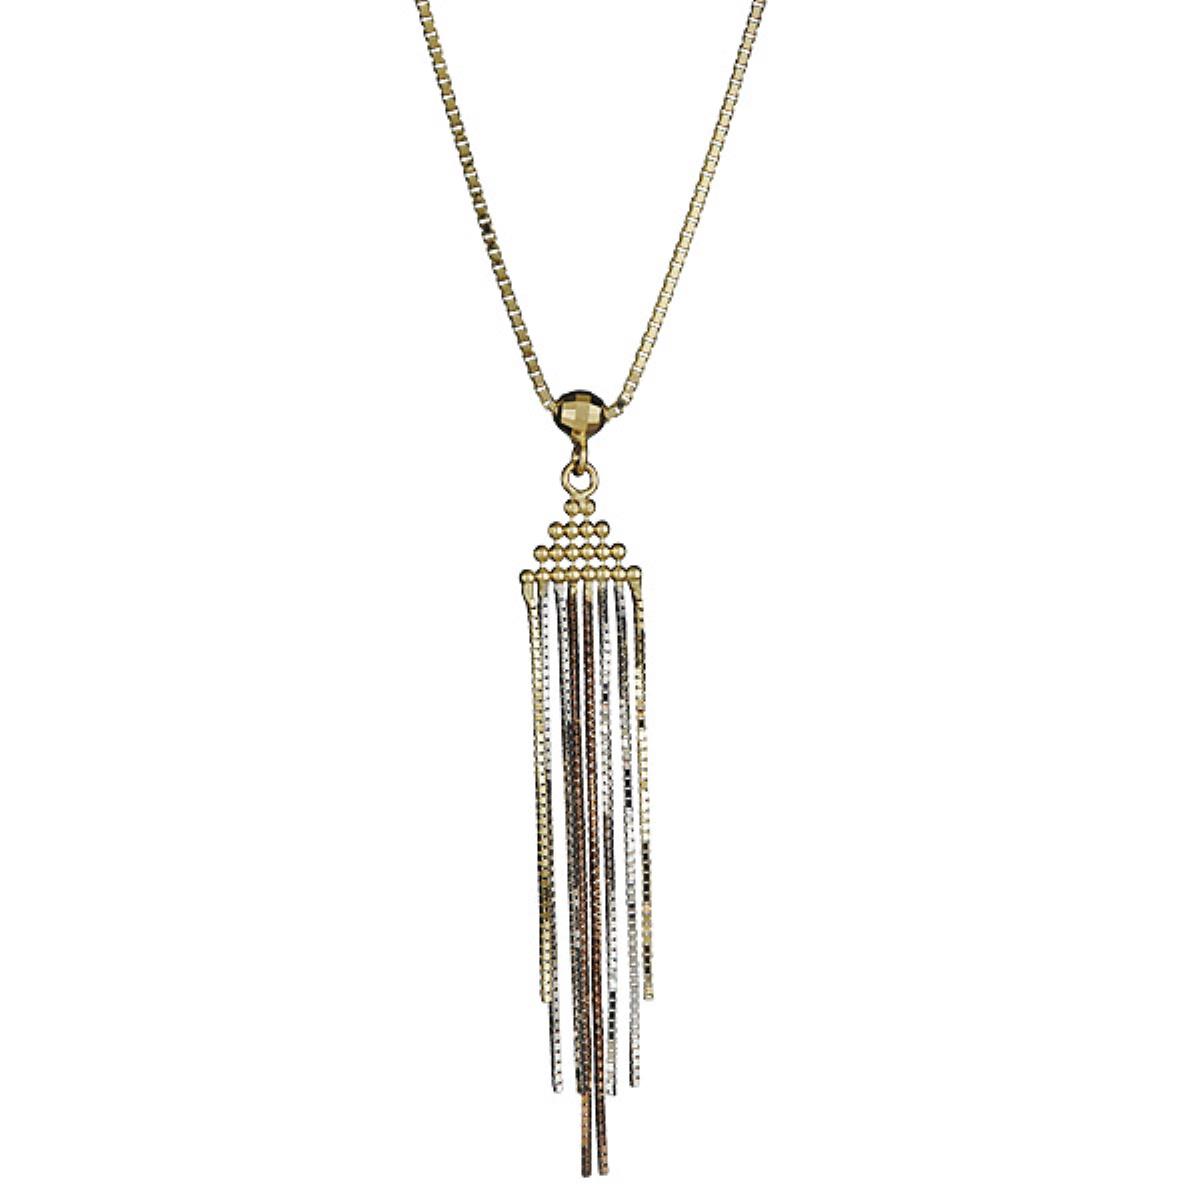 14K Tri-color Gold Beaded Chain Tassel Dangling 17" Necklace